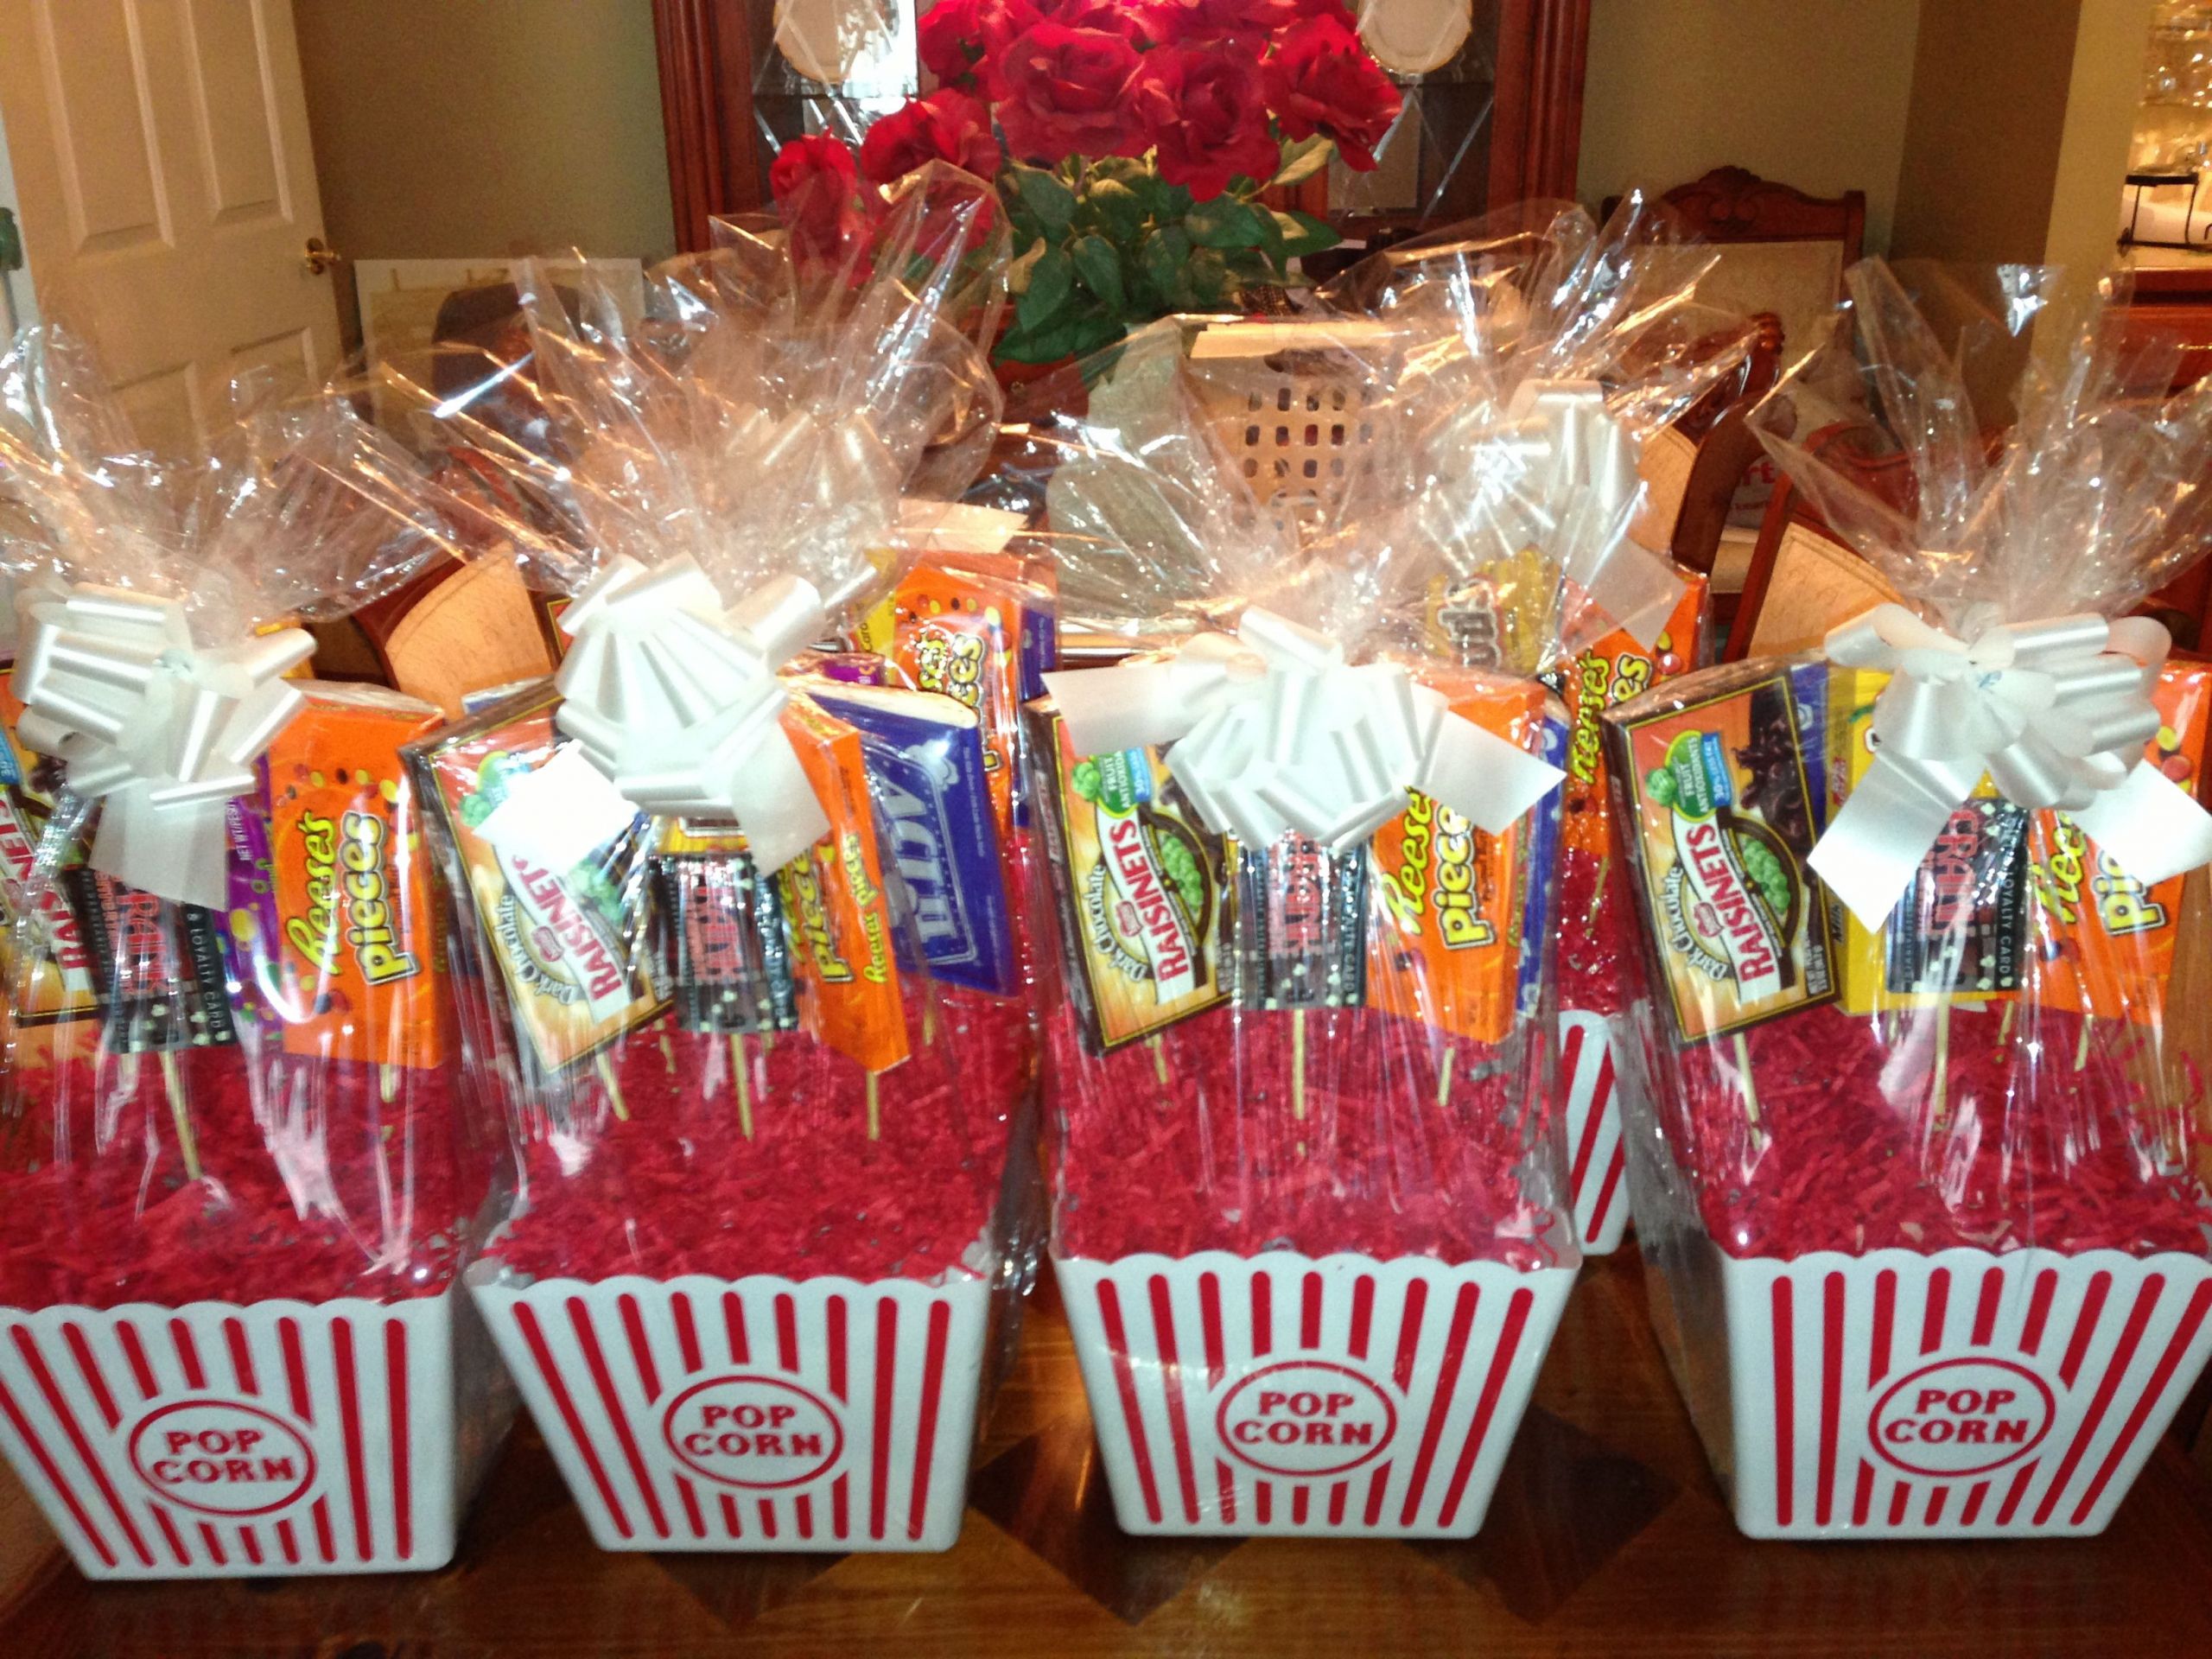 Popcorn Gift Basket Ideas
 Movie t baskets Each contains a $10 movie theatre t